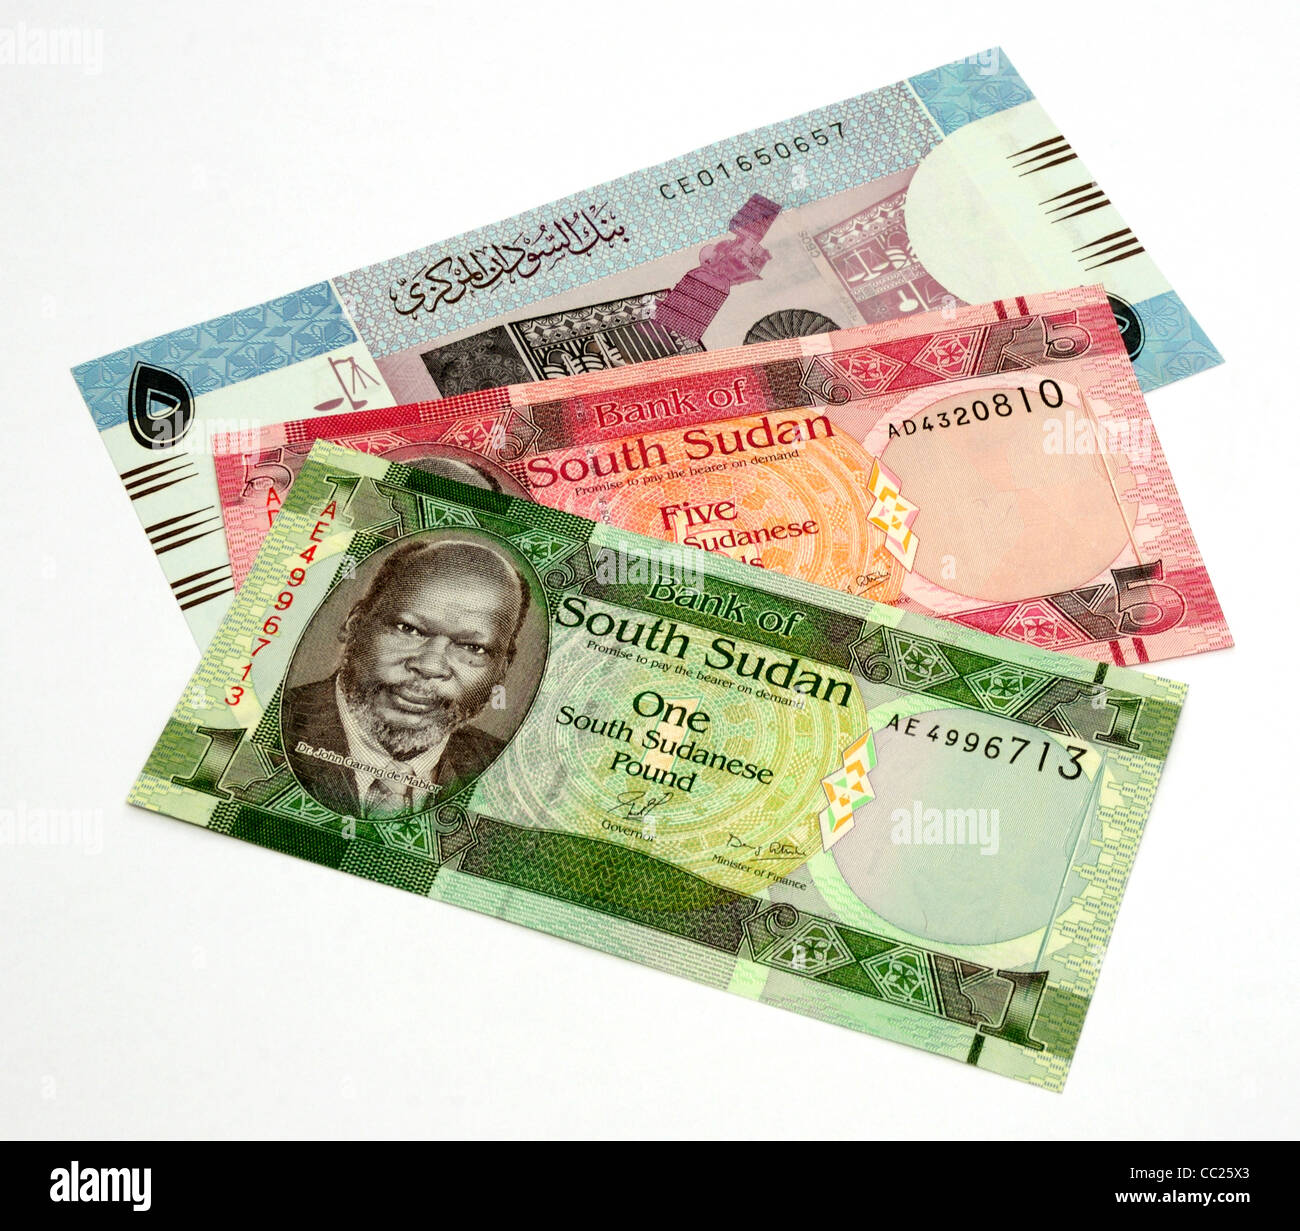 North and South Sudan Currency. Stock Photo